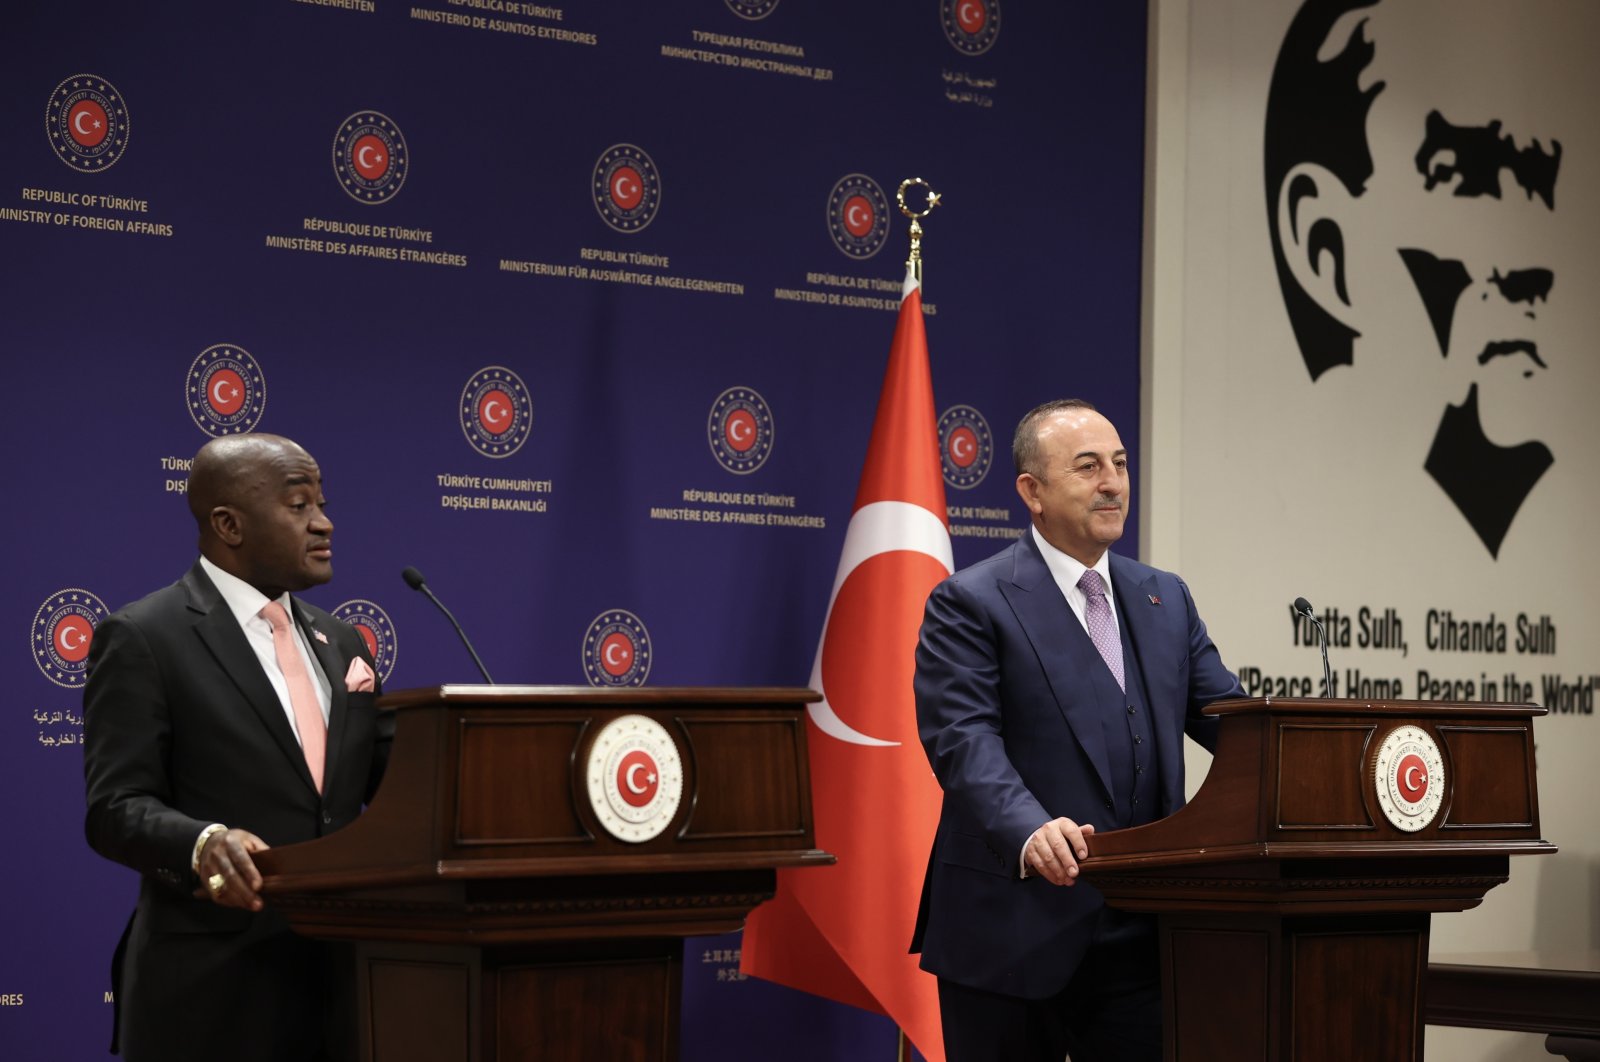 Foreign Minister Mevlüt Çavuşoğlu (R) and his Liberian counterpart Dee-Maxwell Saah Kemayah hold a joint news conference in the capital Ankara, Turkey, May 5, 2022. (AA)